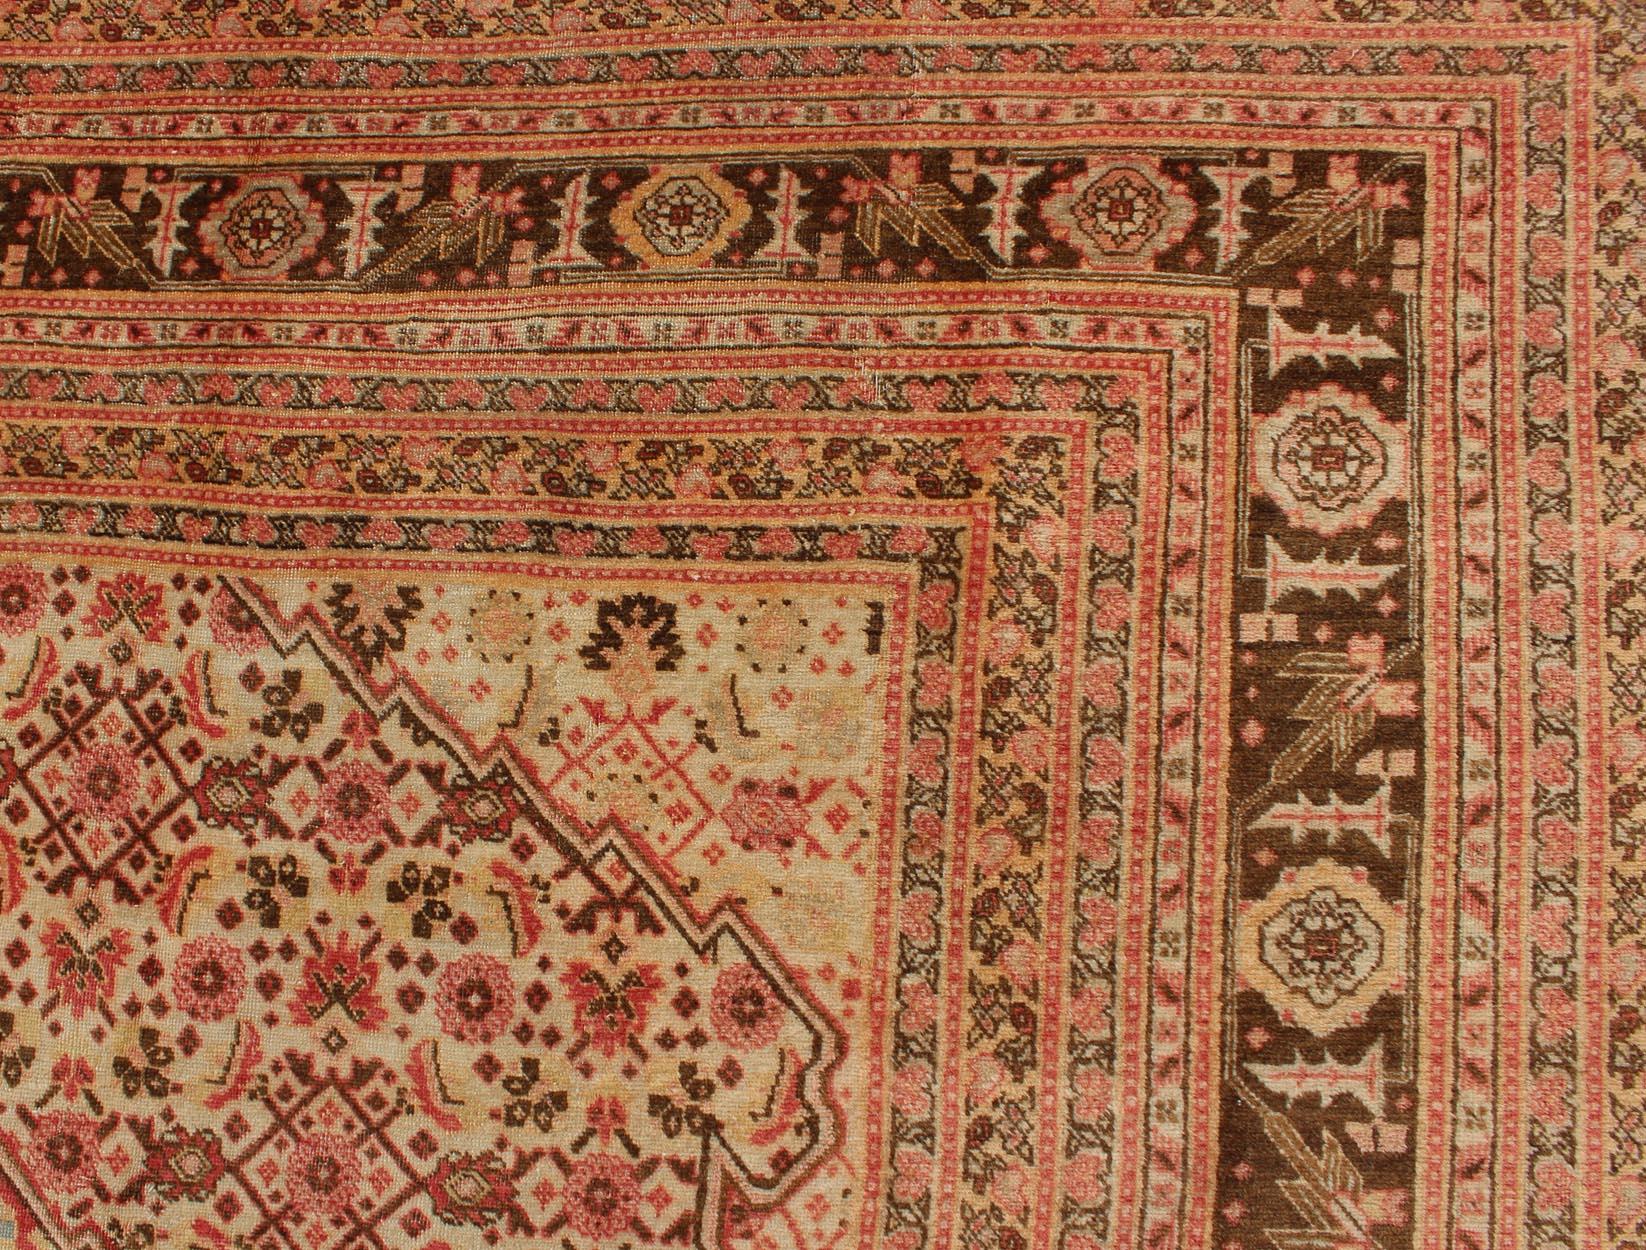 Antique Persian Tabriz Rug with Medallion Design in Coral, Cream and Brown Tones For Sale 2